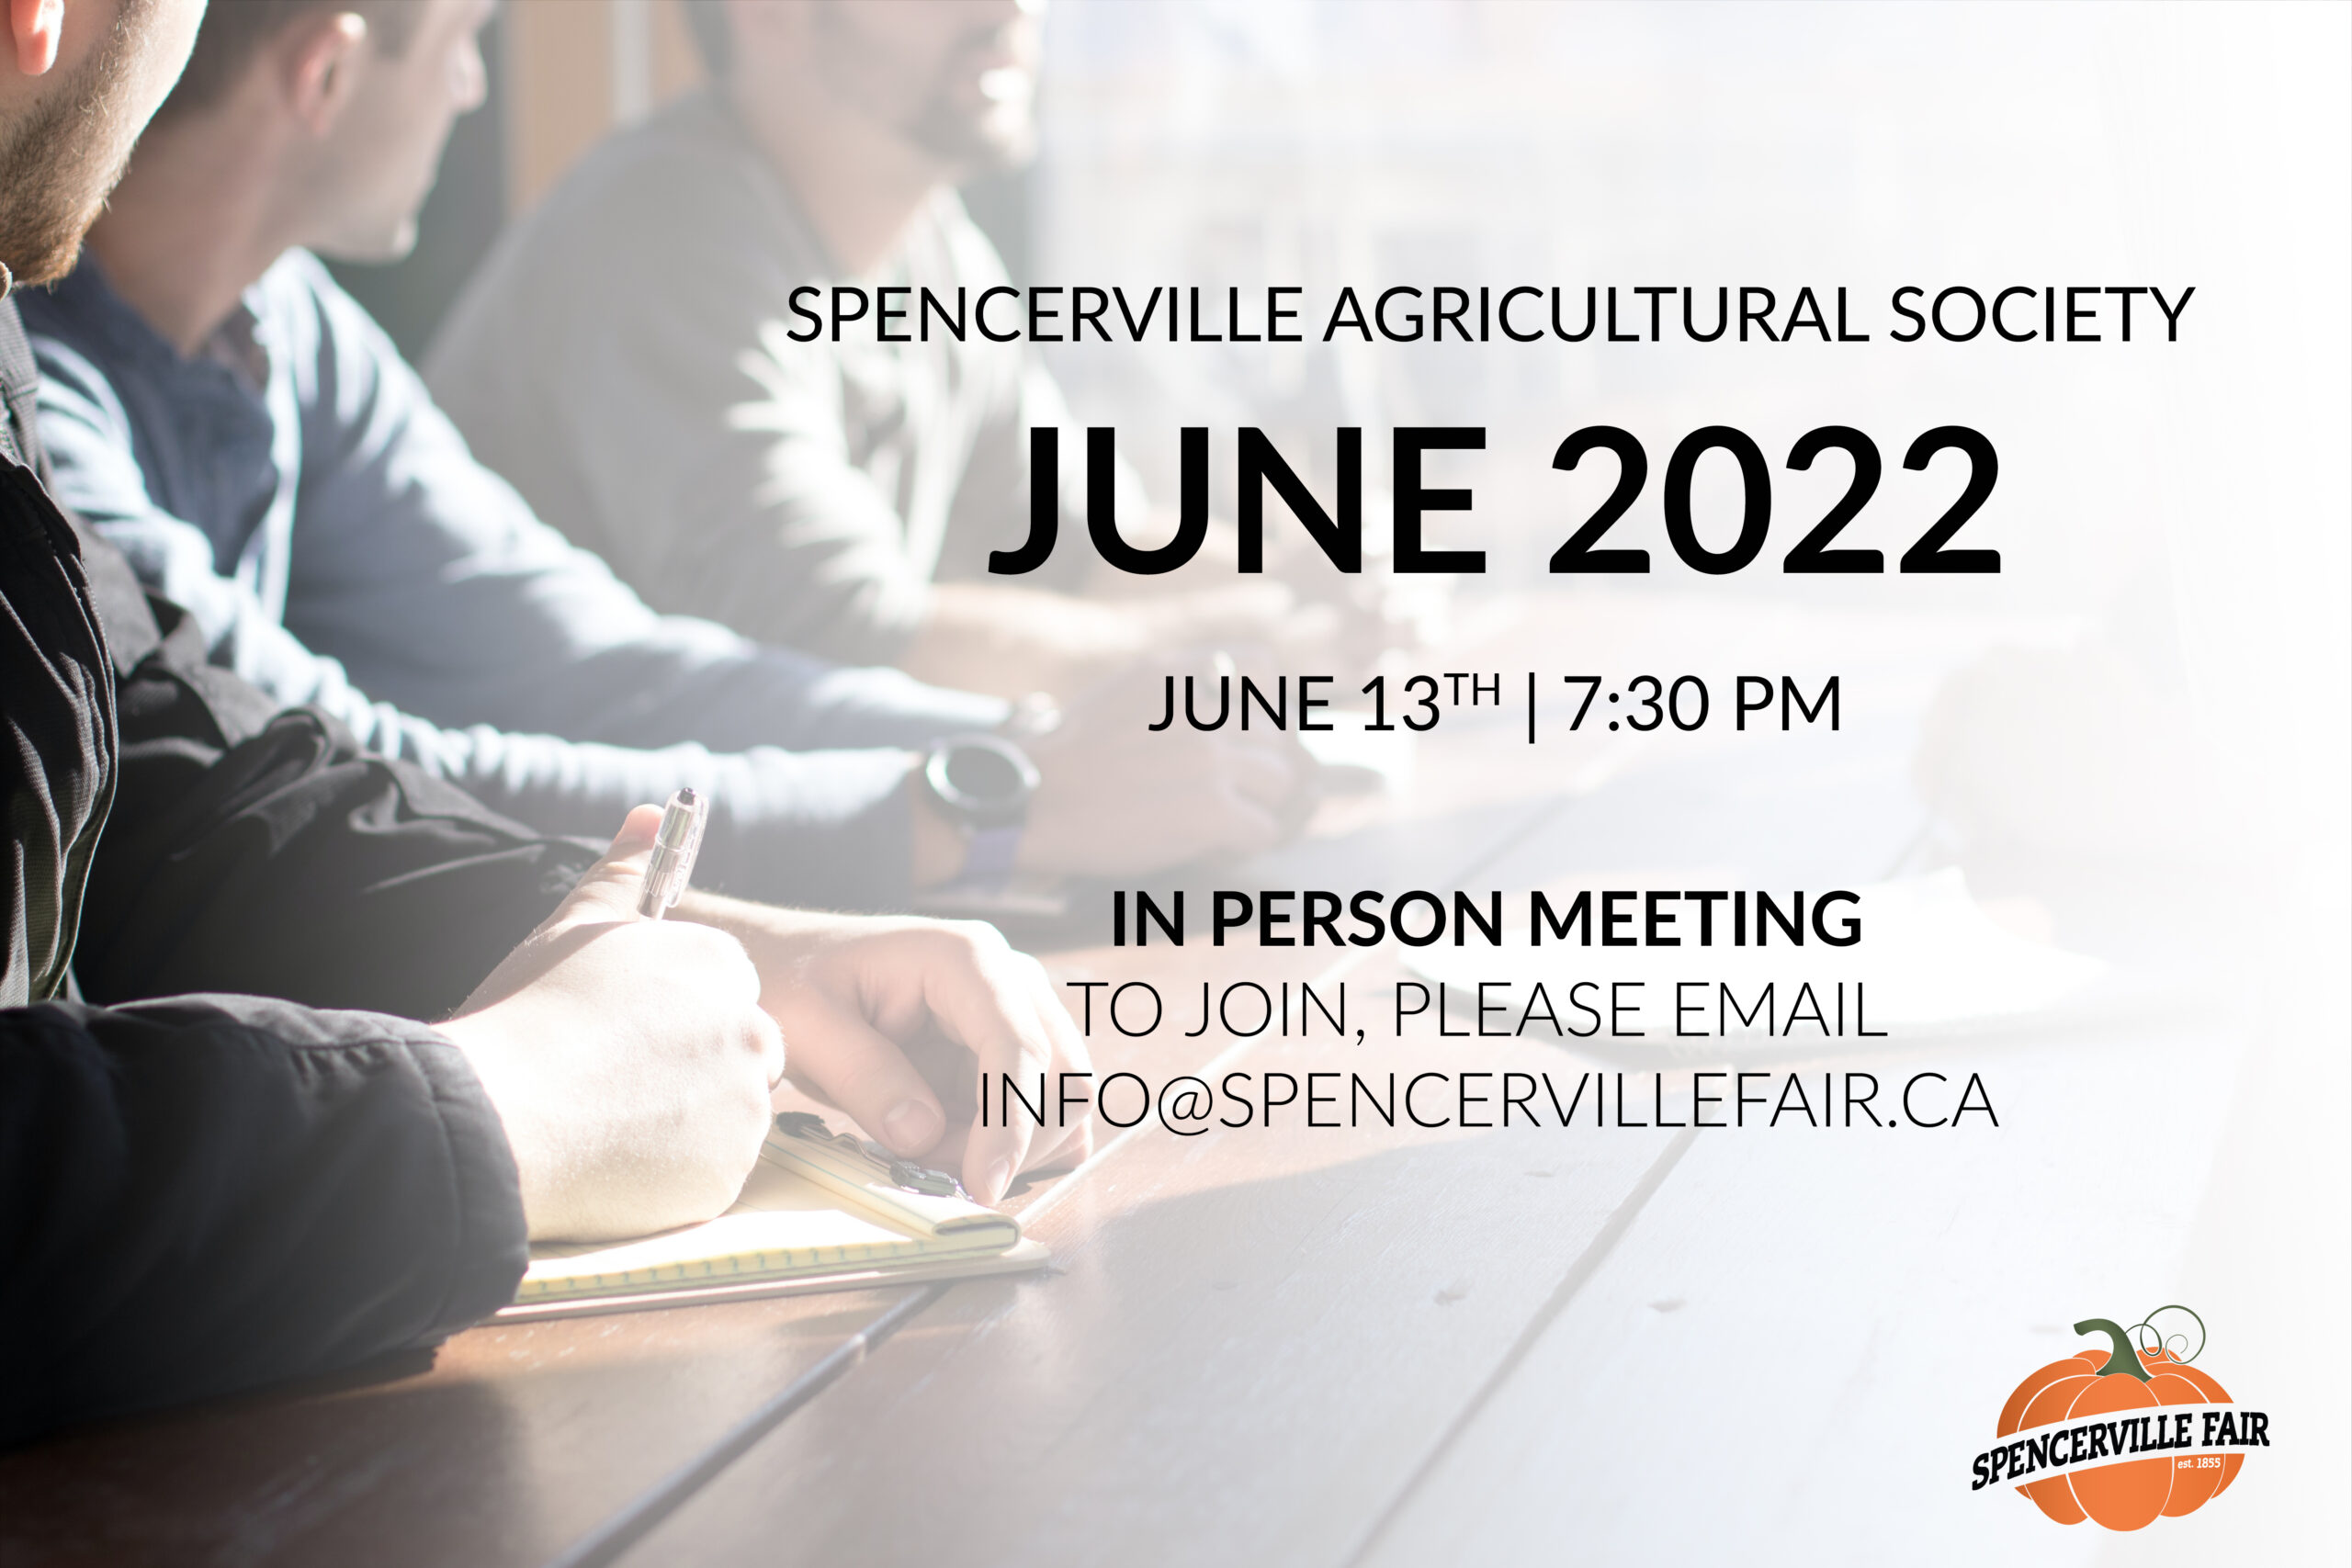 spencerville agricultural society june meeting logo